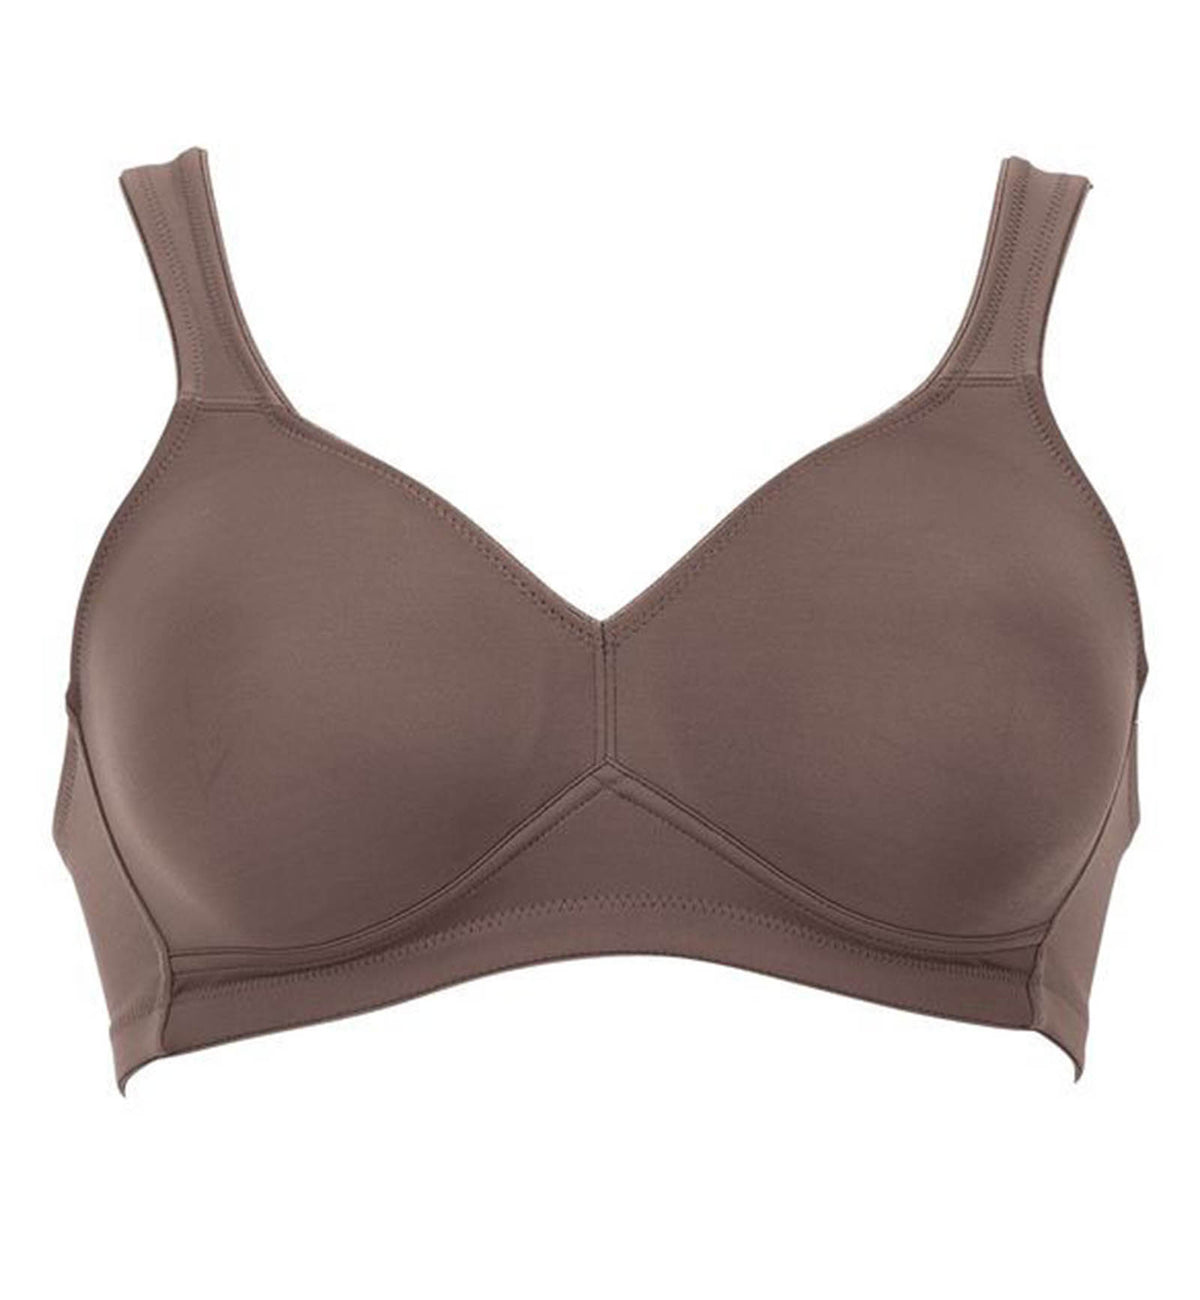 Rosa Faia by Anita Twin Seamless Softcup Comfort Bra (5493),32A,Deep Taupe - Deep Taupe,32A